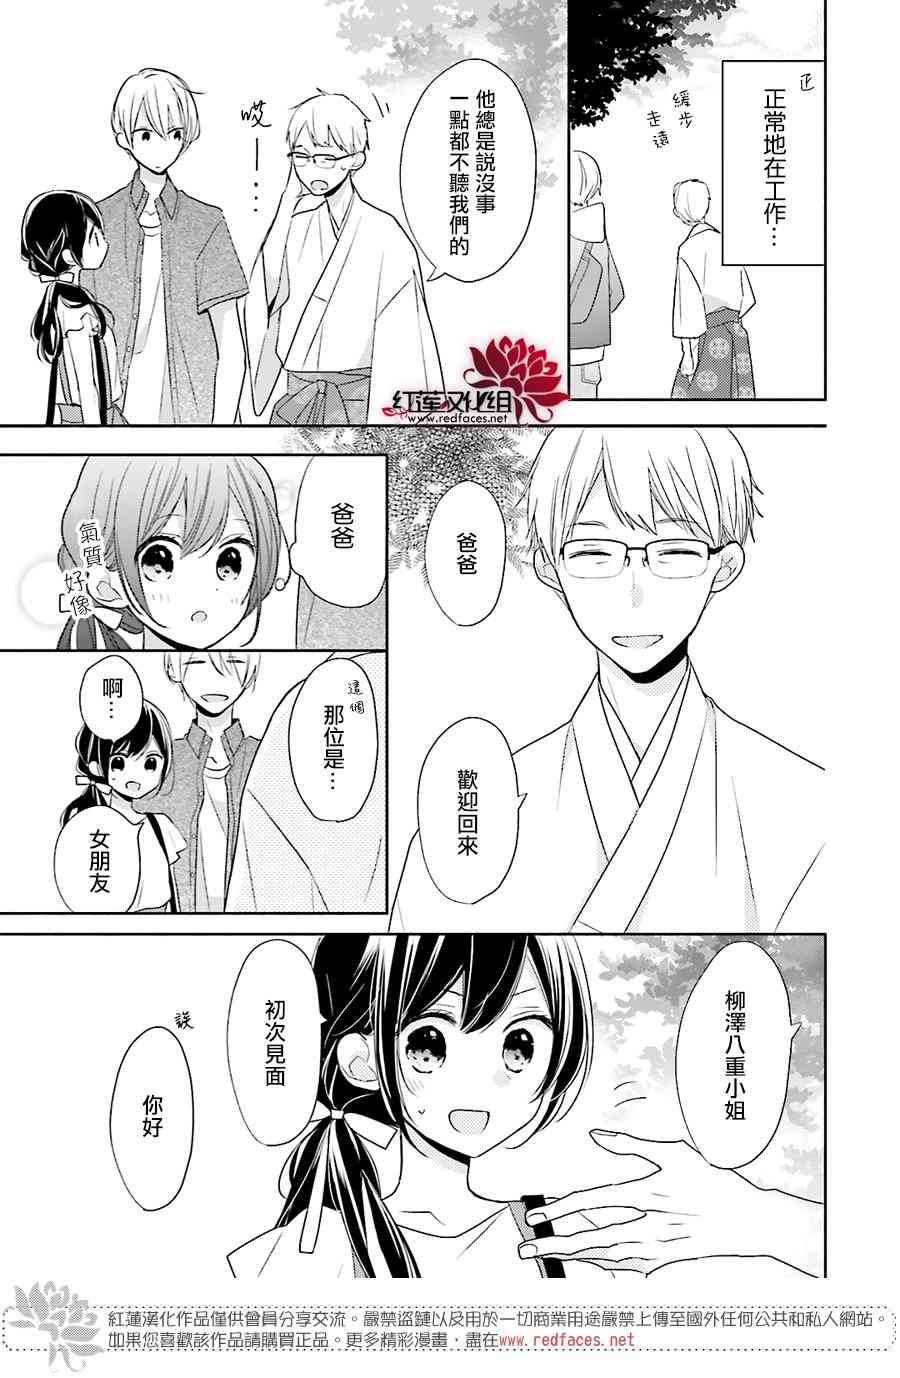 If given a second chance - 12話 - 5